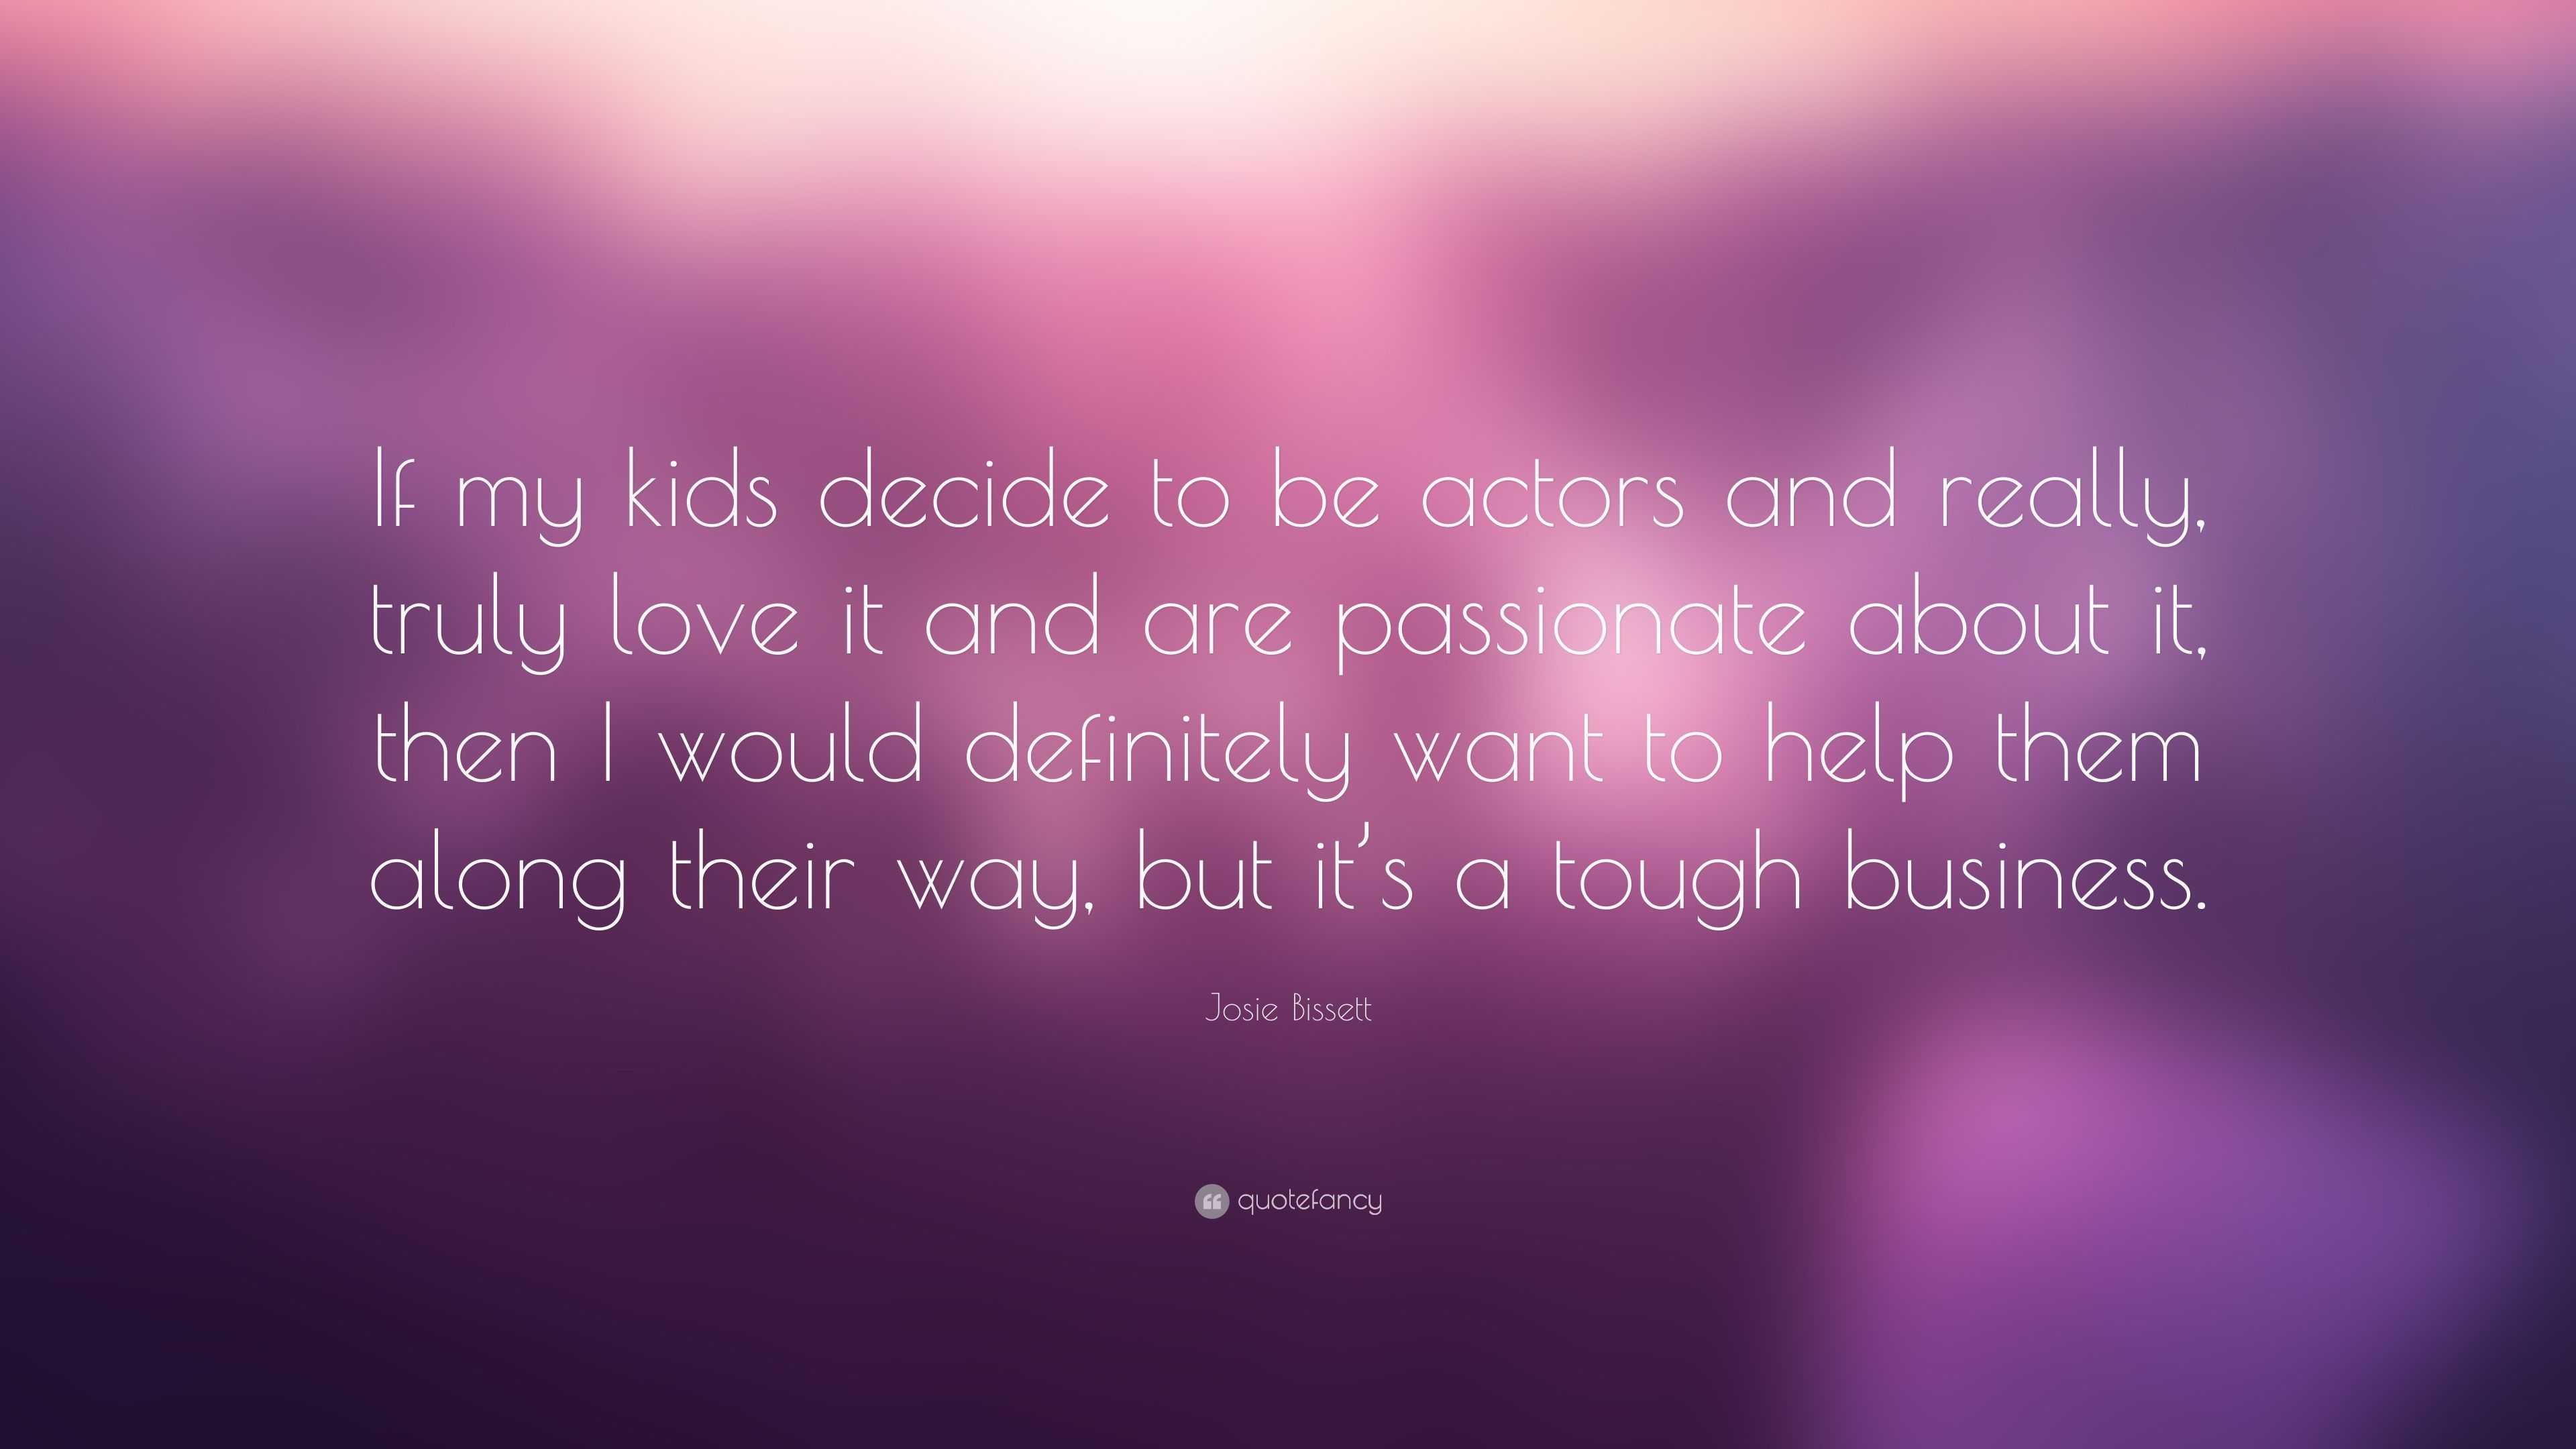 Josie Bissett Quote: “If my kids decide to be actors and really, truly ...